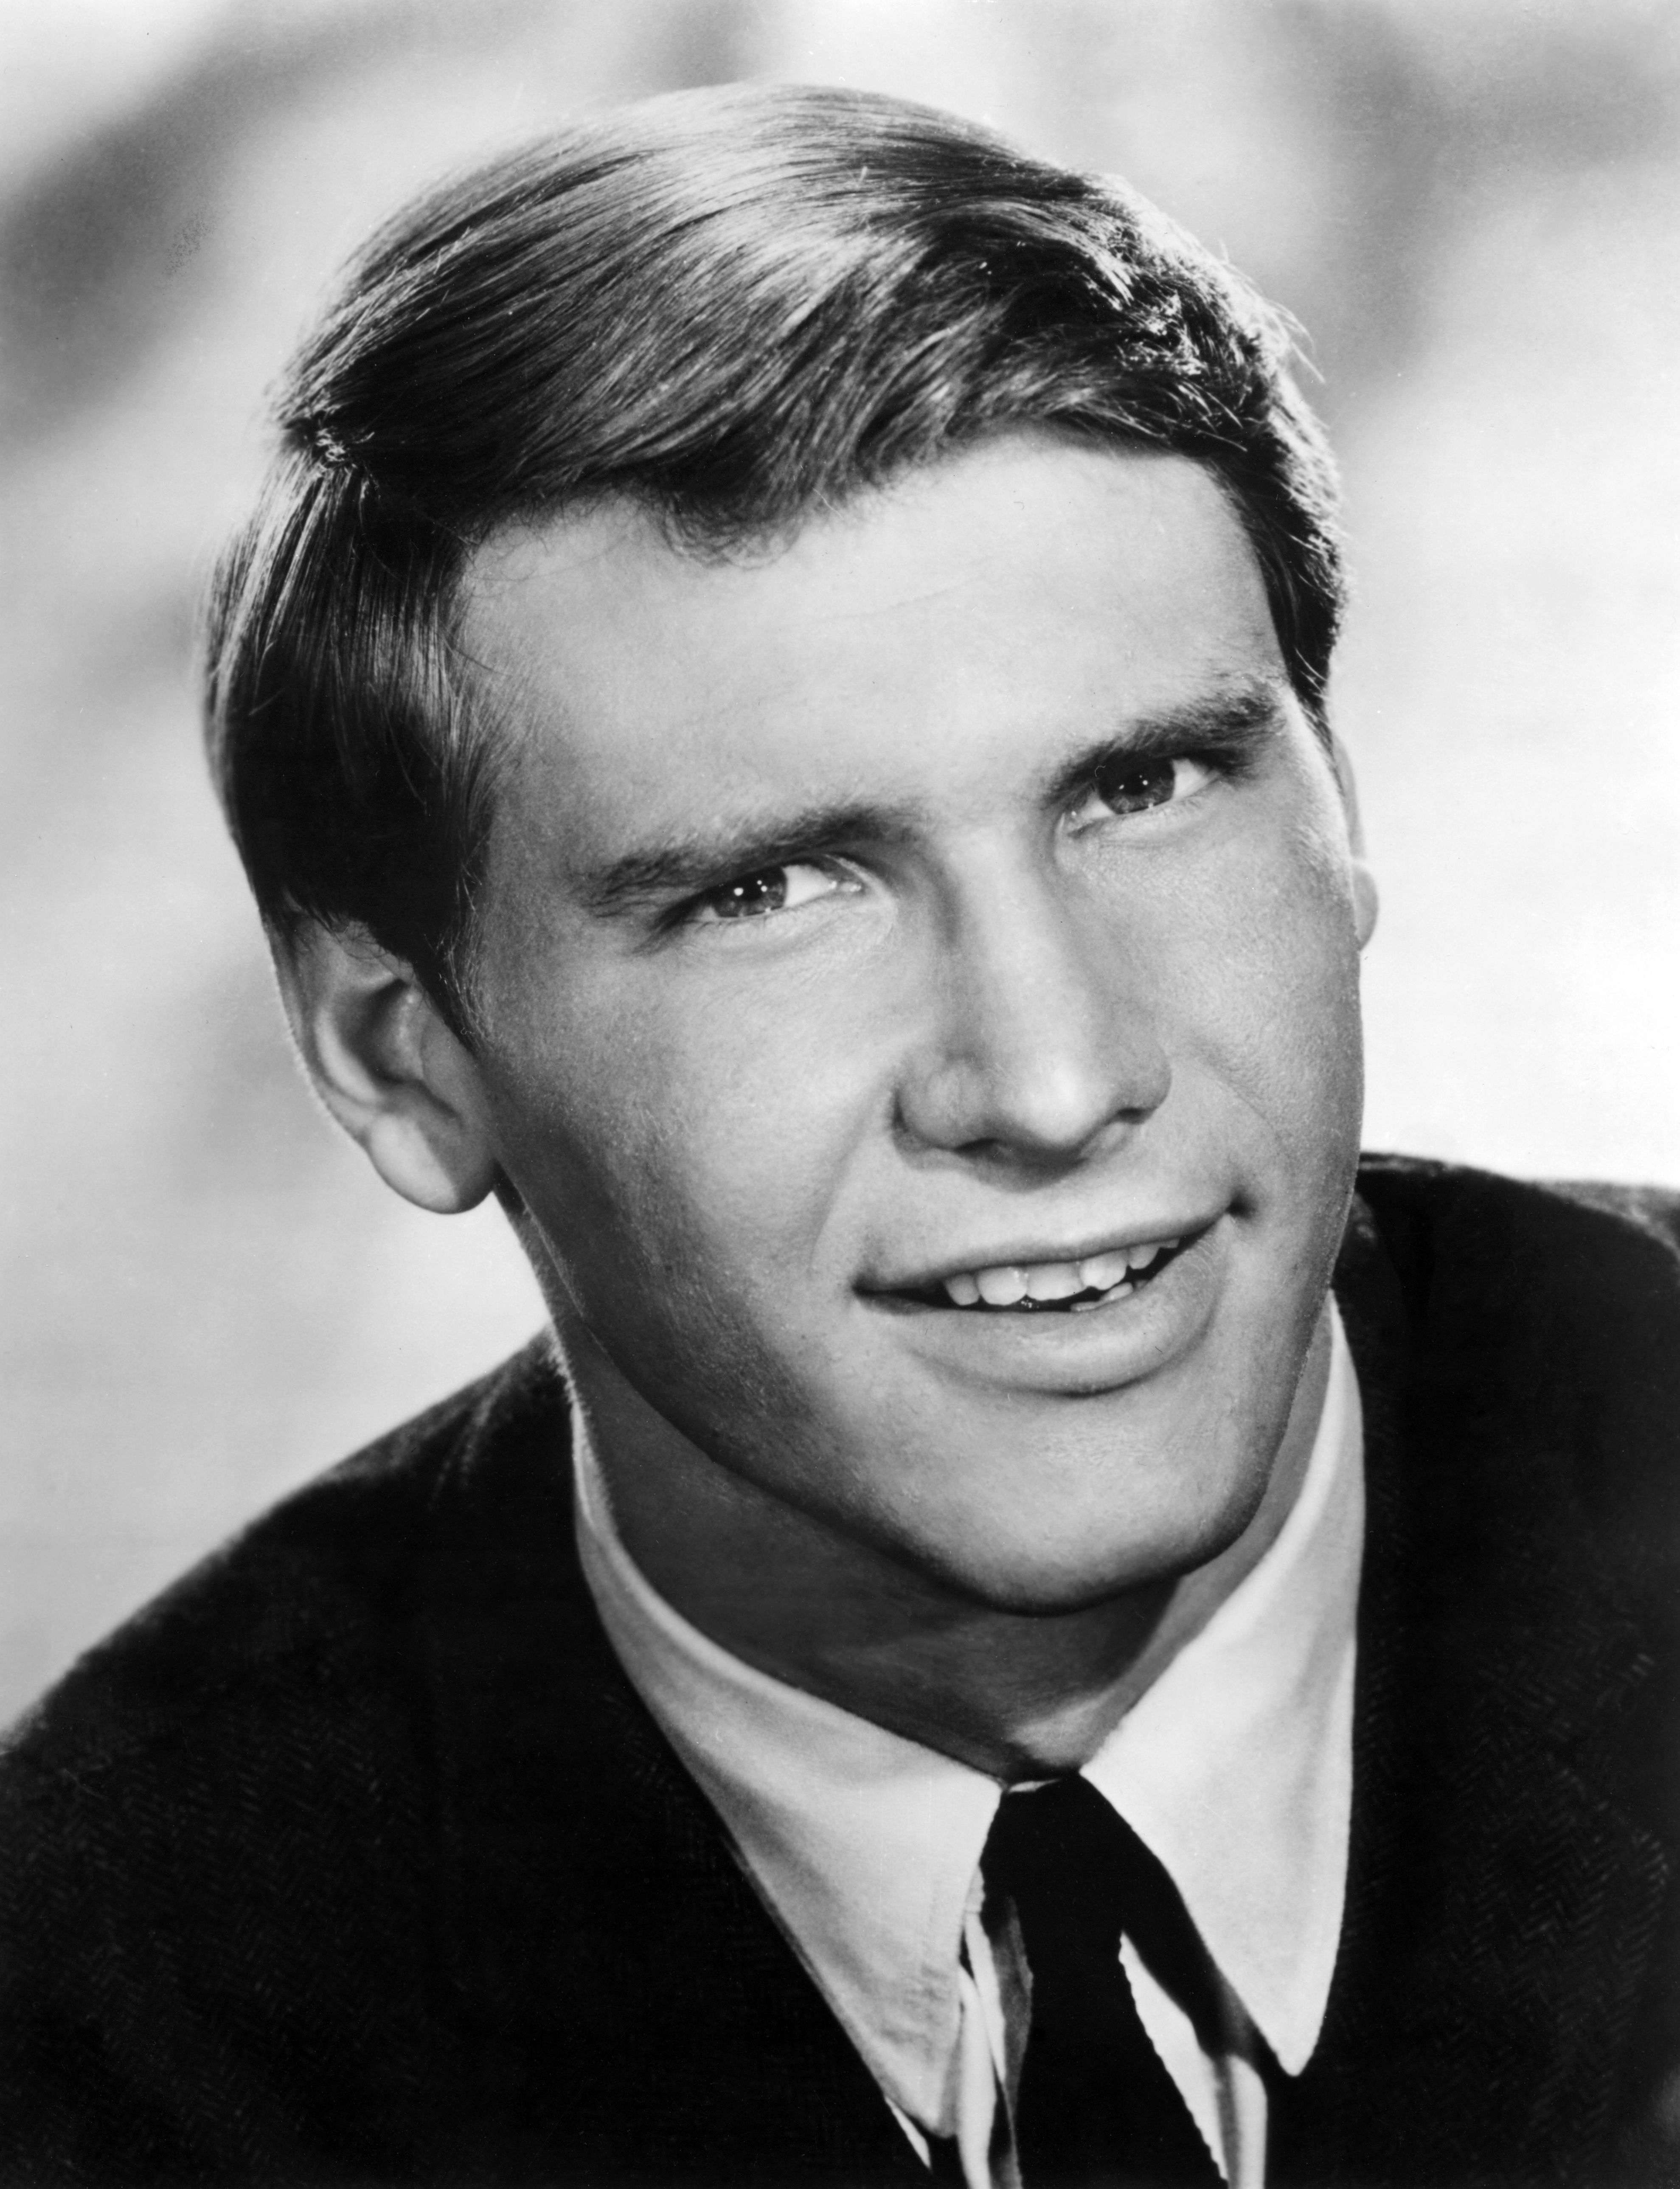 Young Harrison Ford headshot